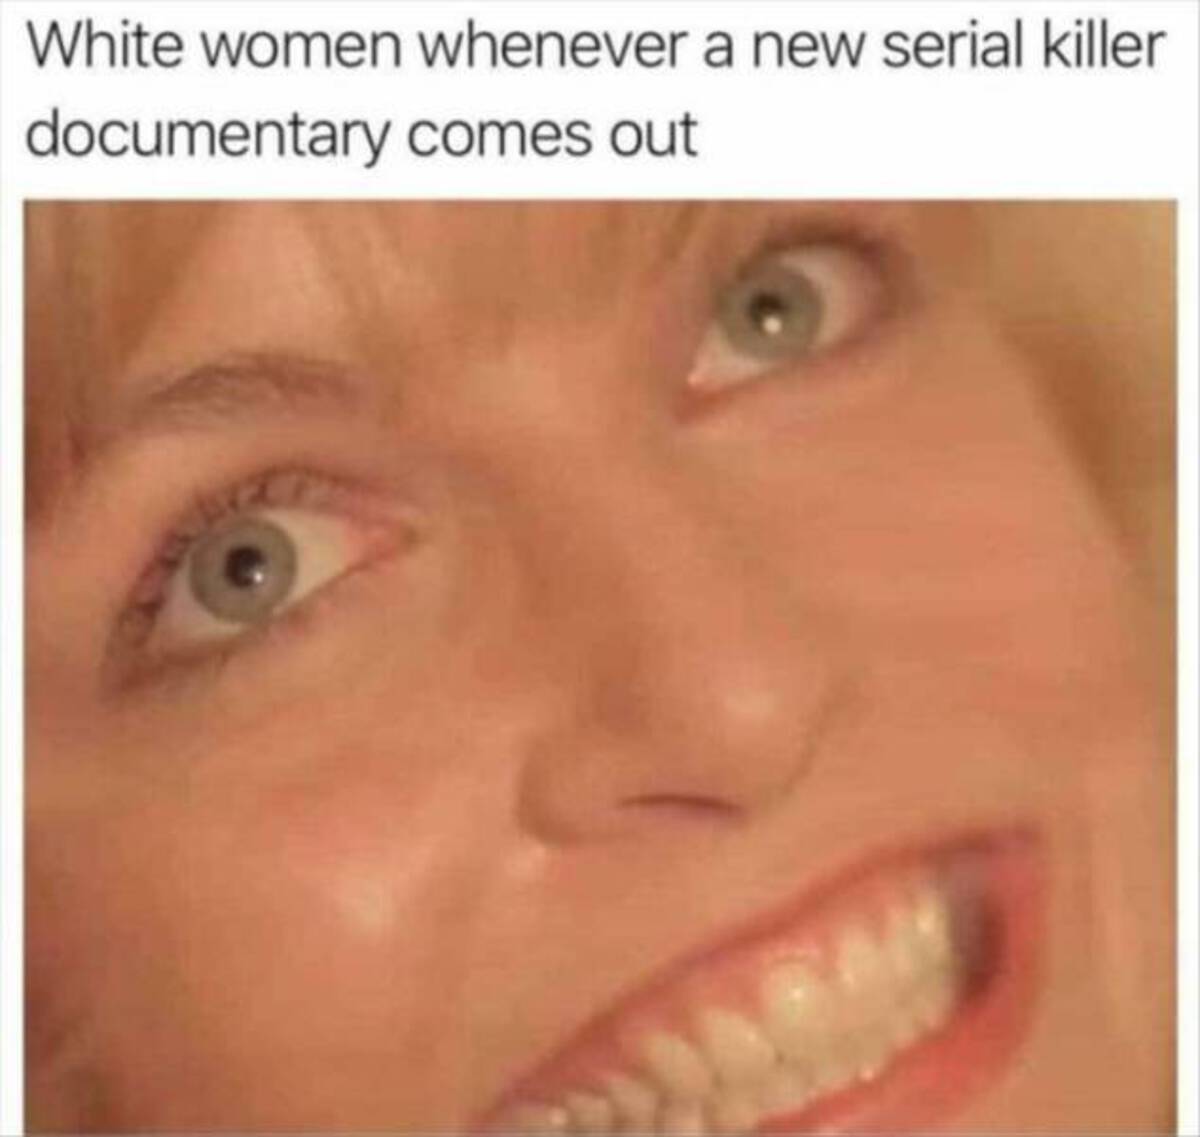 photo caption - White women whenever a new serial killer documentary comes out